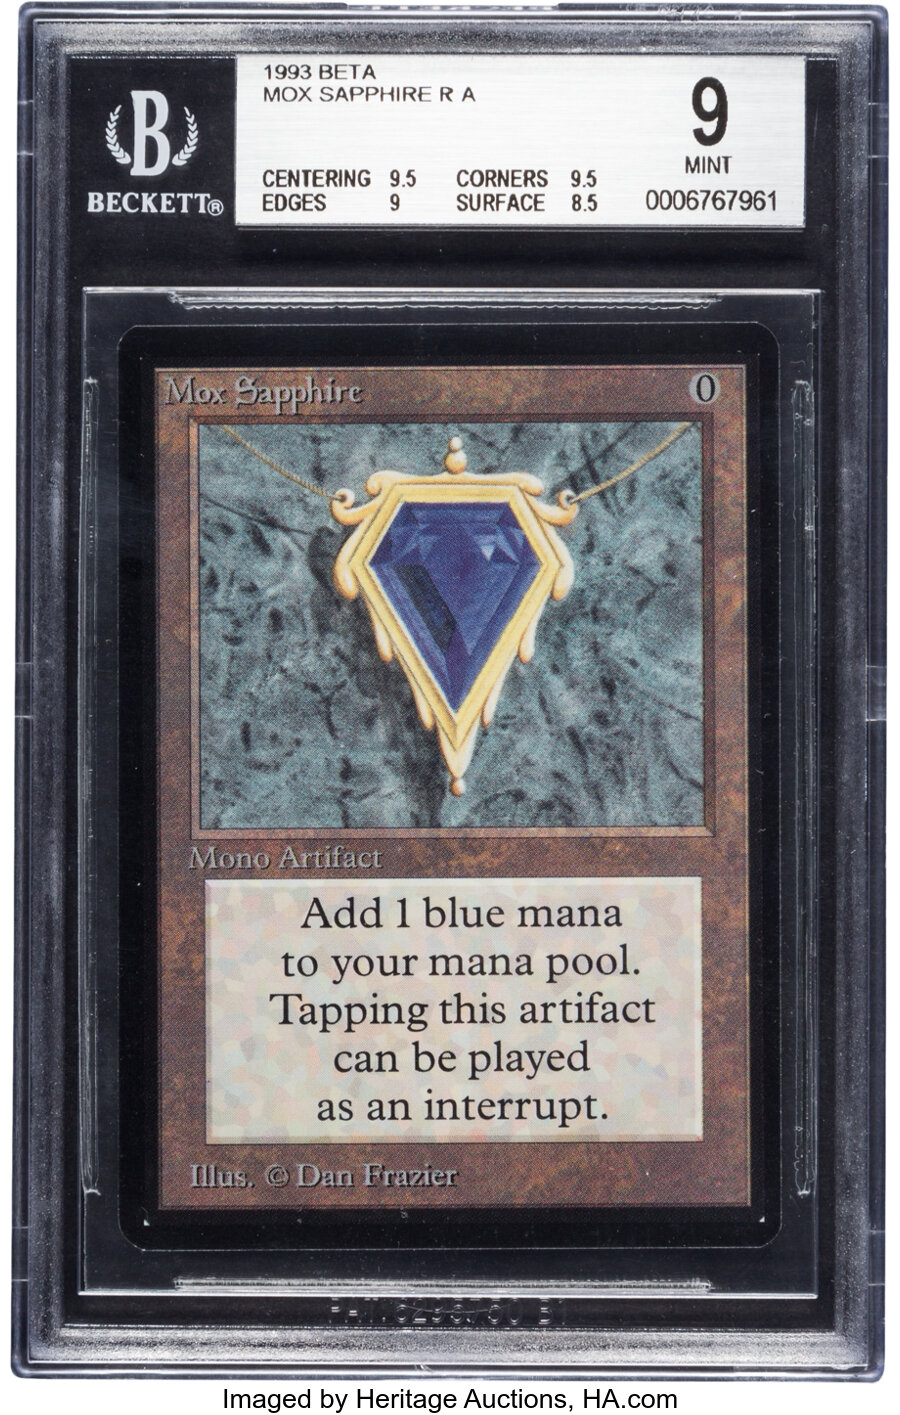 Magic: The Gathering Mox Sapphire Beta Edition Trading Card (Wizards of the Coast, 1993) BGS MINT 9